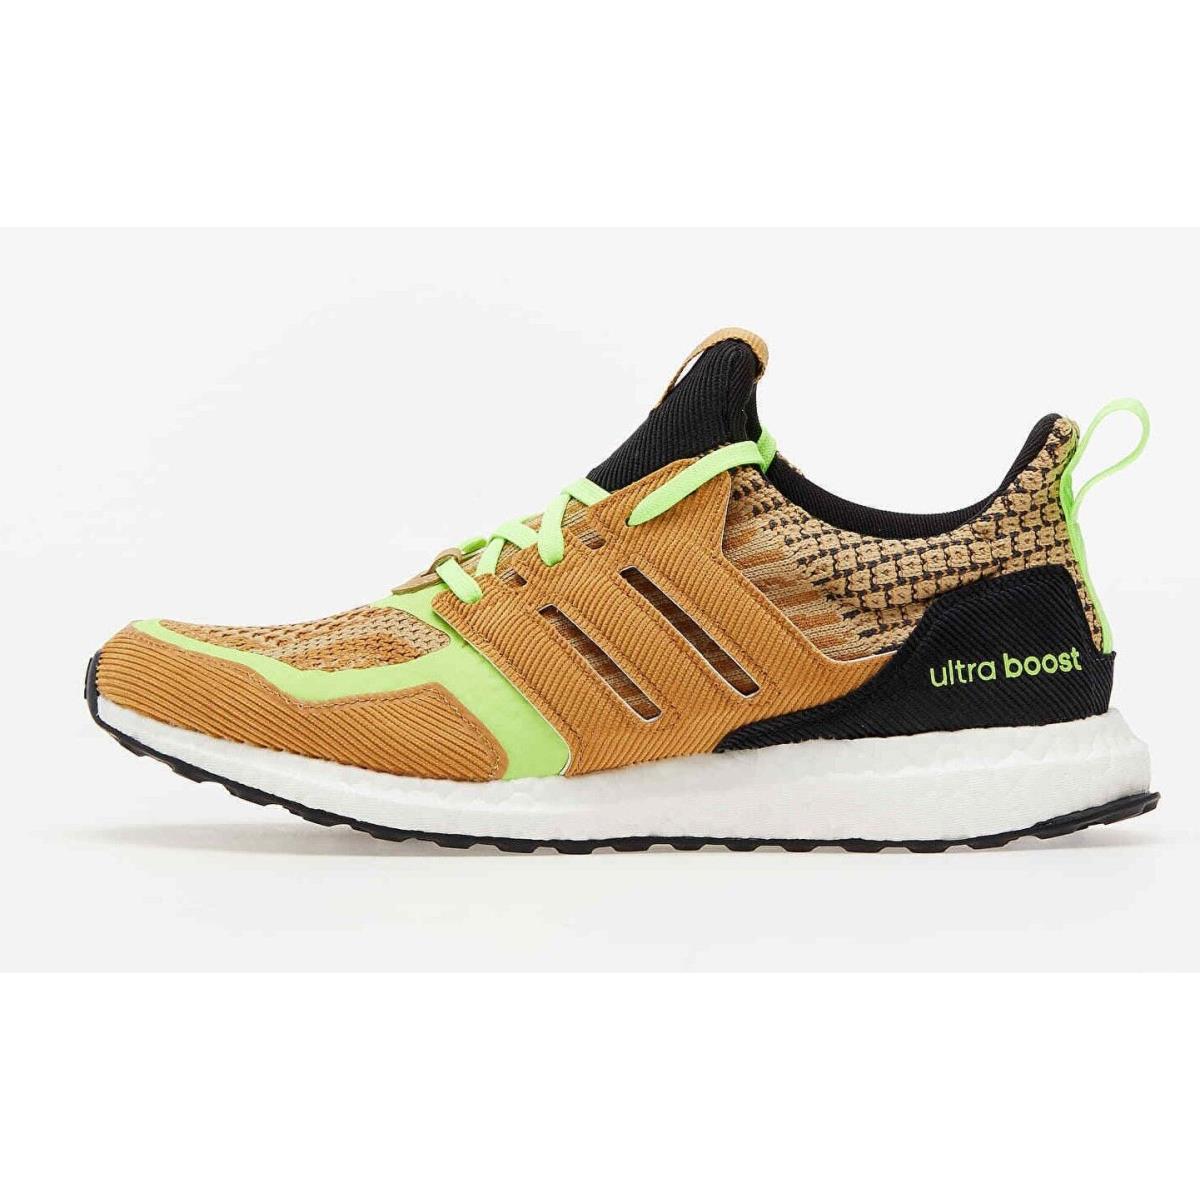 Adidas Ultraboost 5.0 Dna Brown Volt Neon Athletic Running Shoes GX 5255